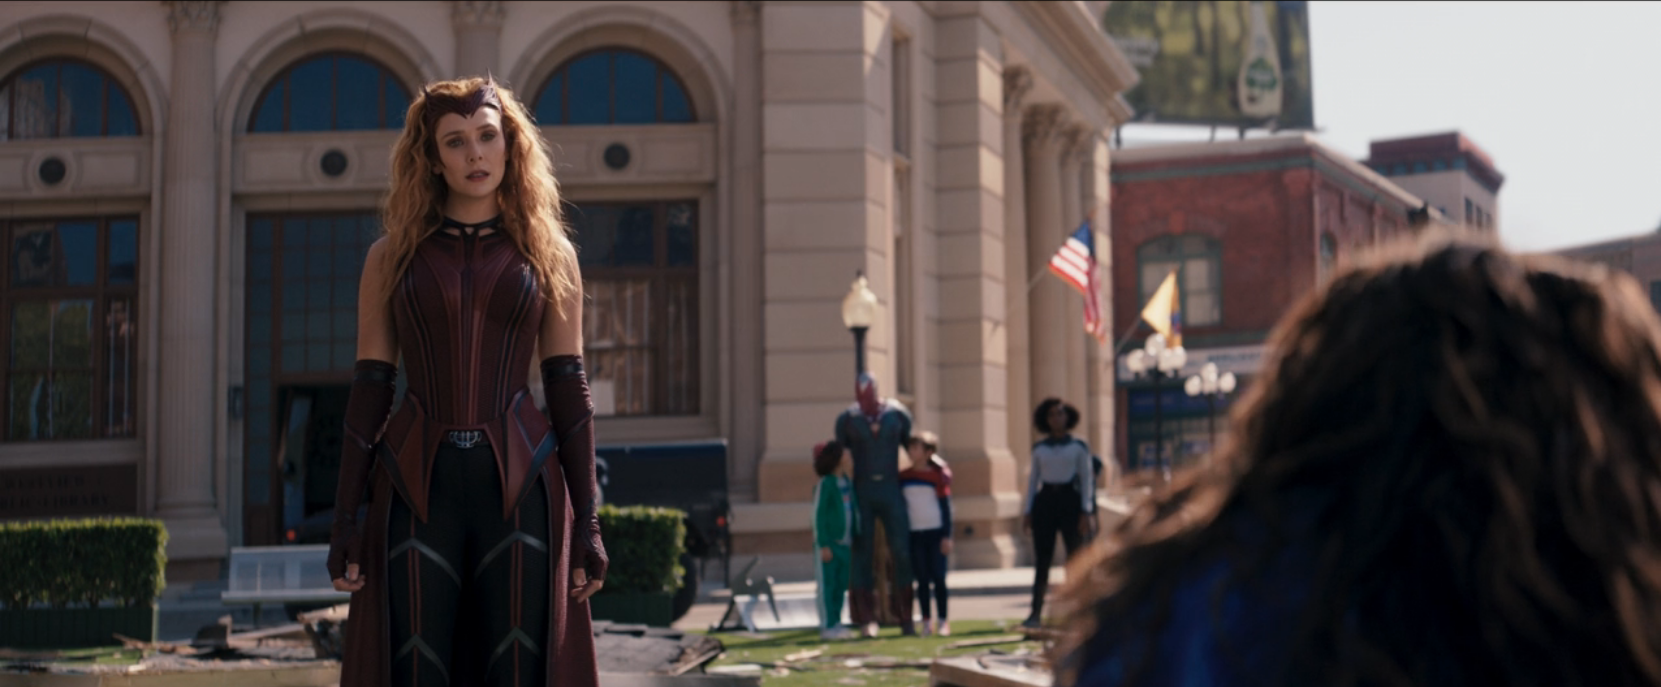 Wanda as The Scarlet Witch 